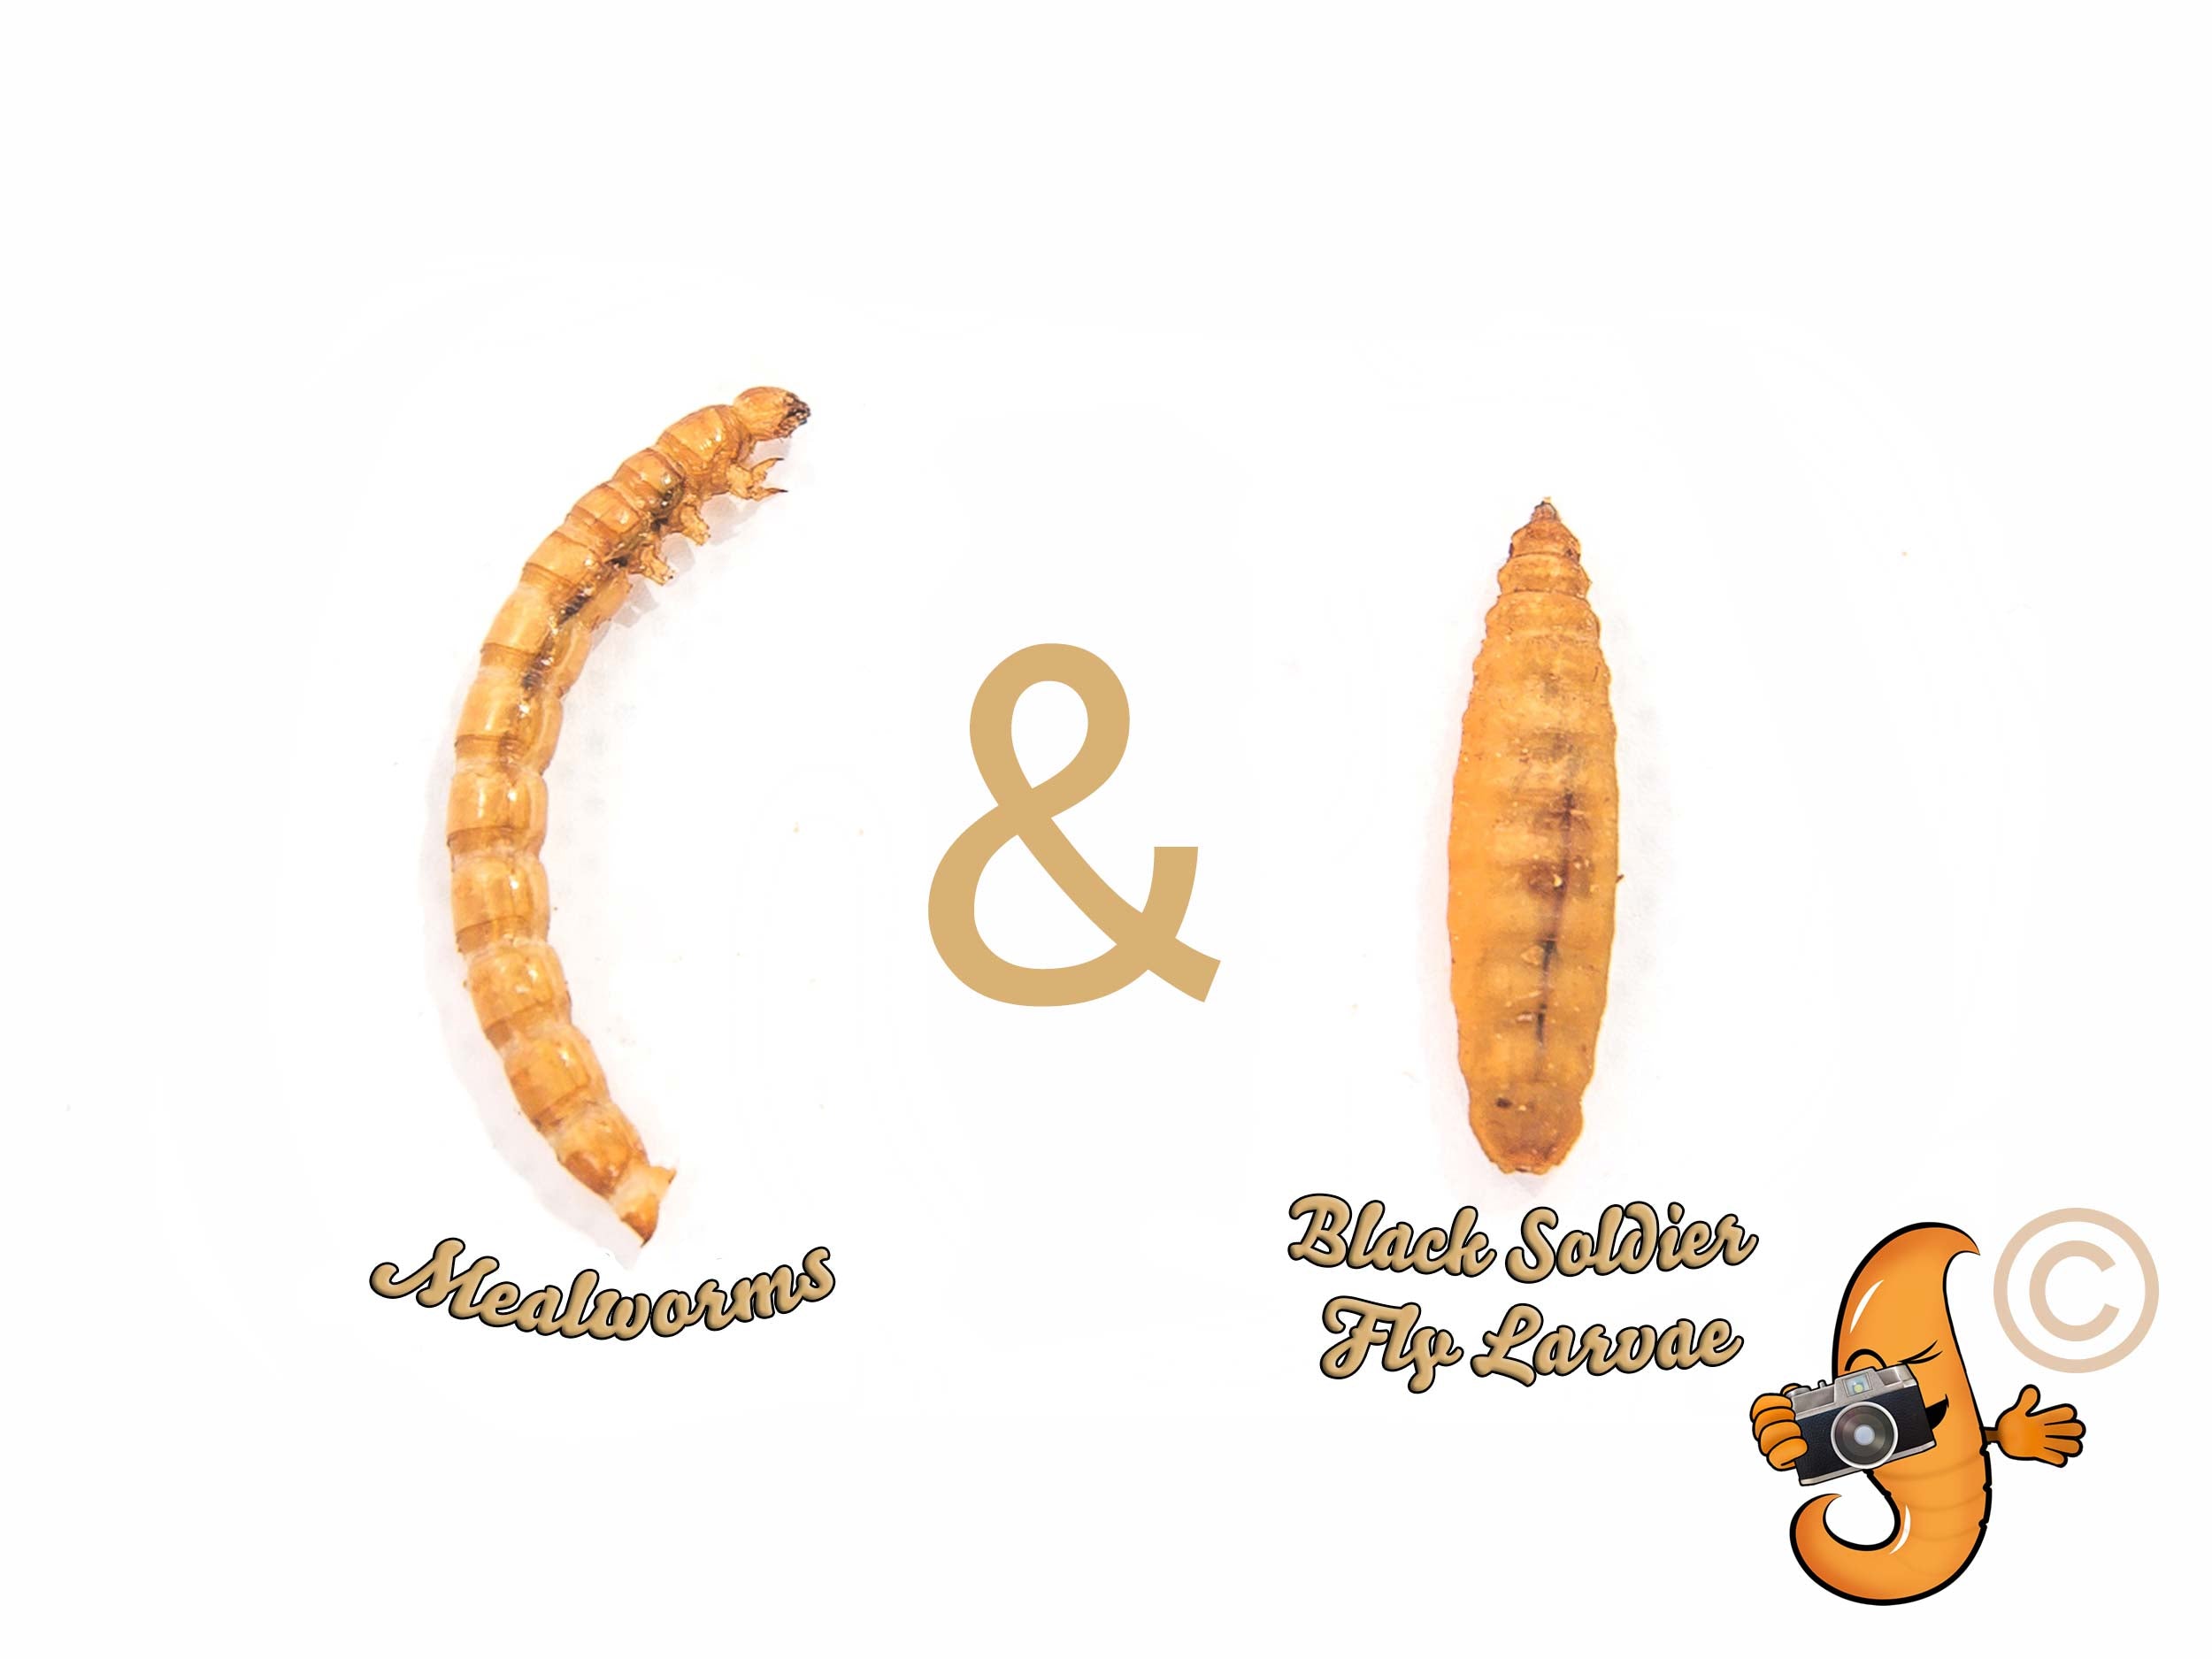 4.54Kg (10lb) Chubby Mix (Mealworm & Black Soldier Fly Larvae)